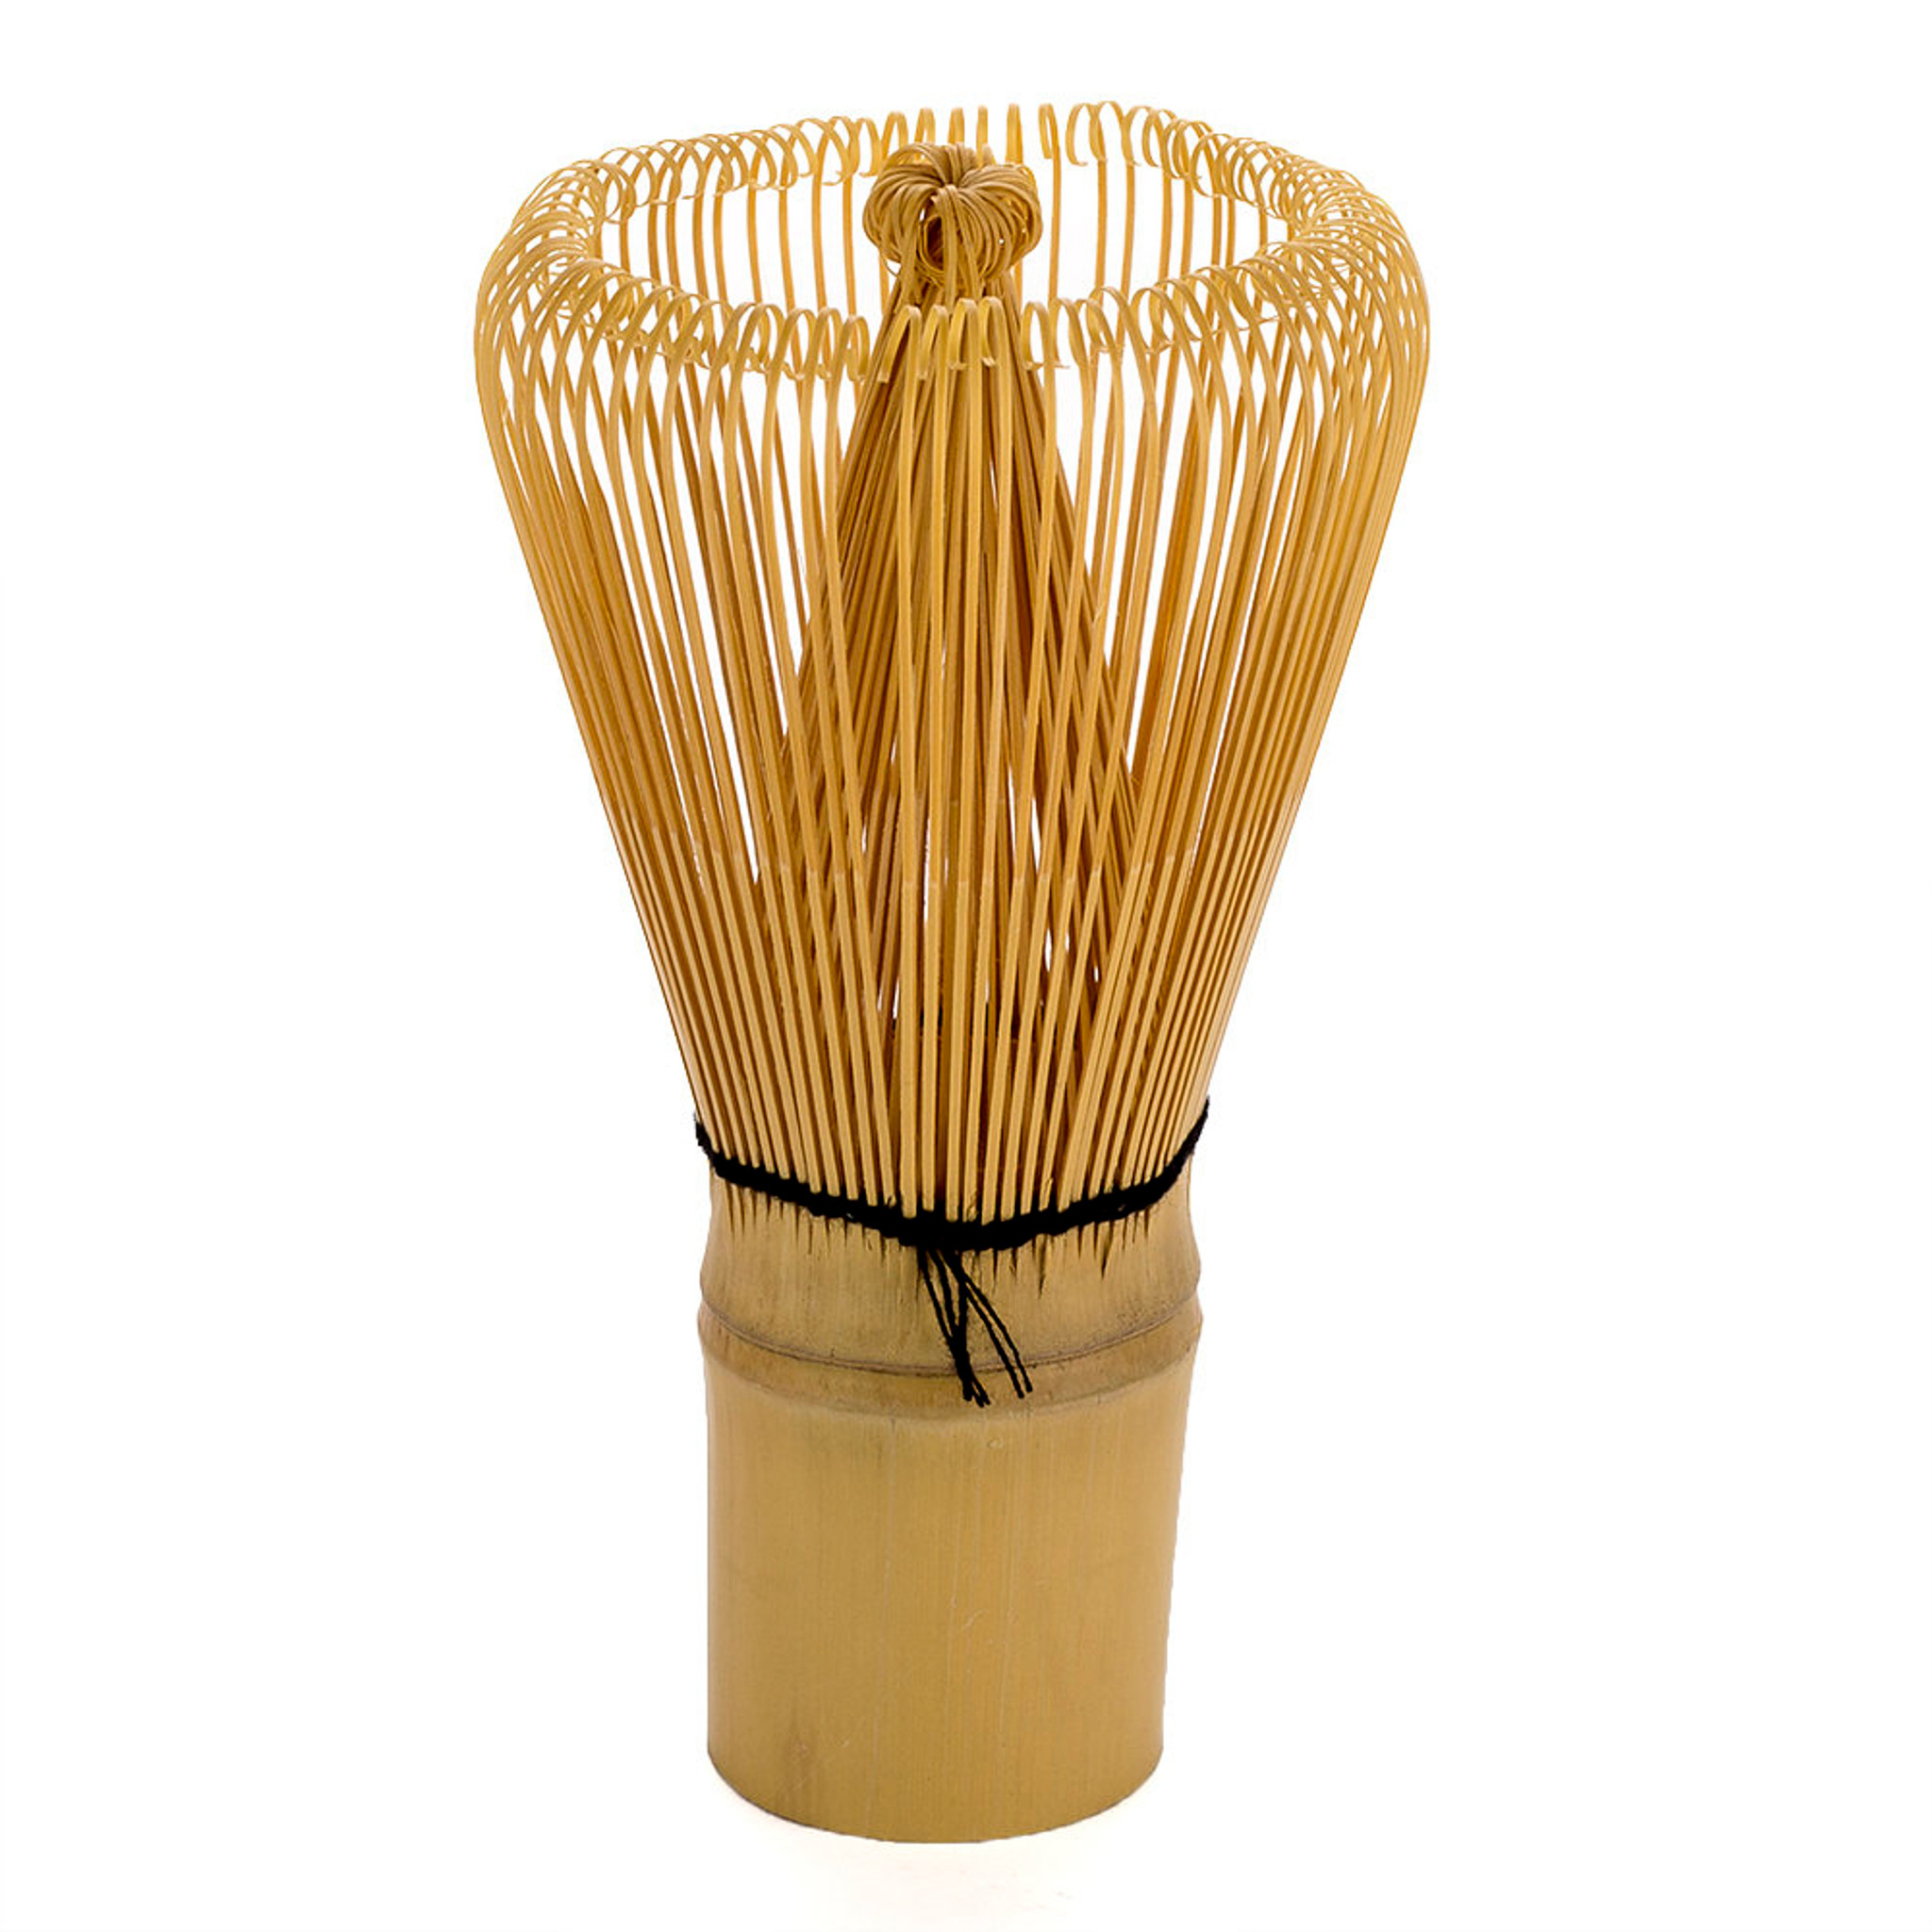 Long Bamboo Matcha Whisk (Chasen) with a Stand